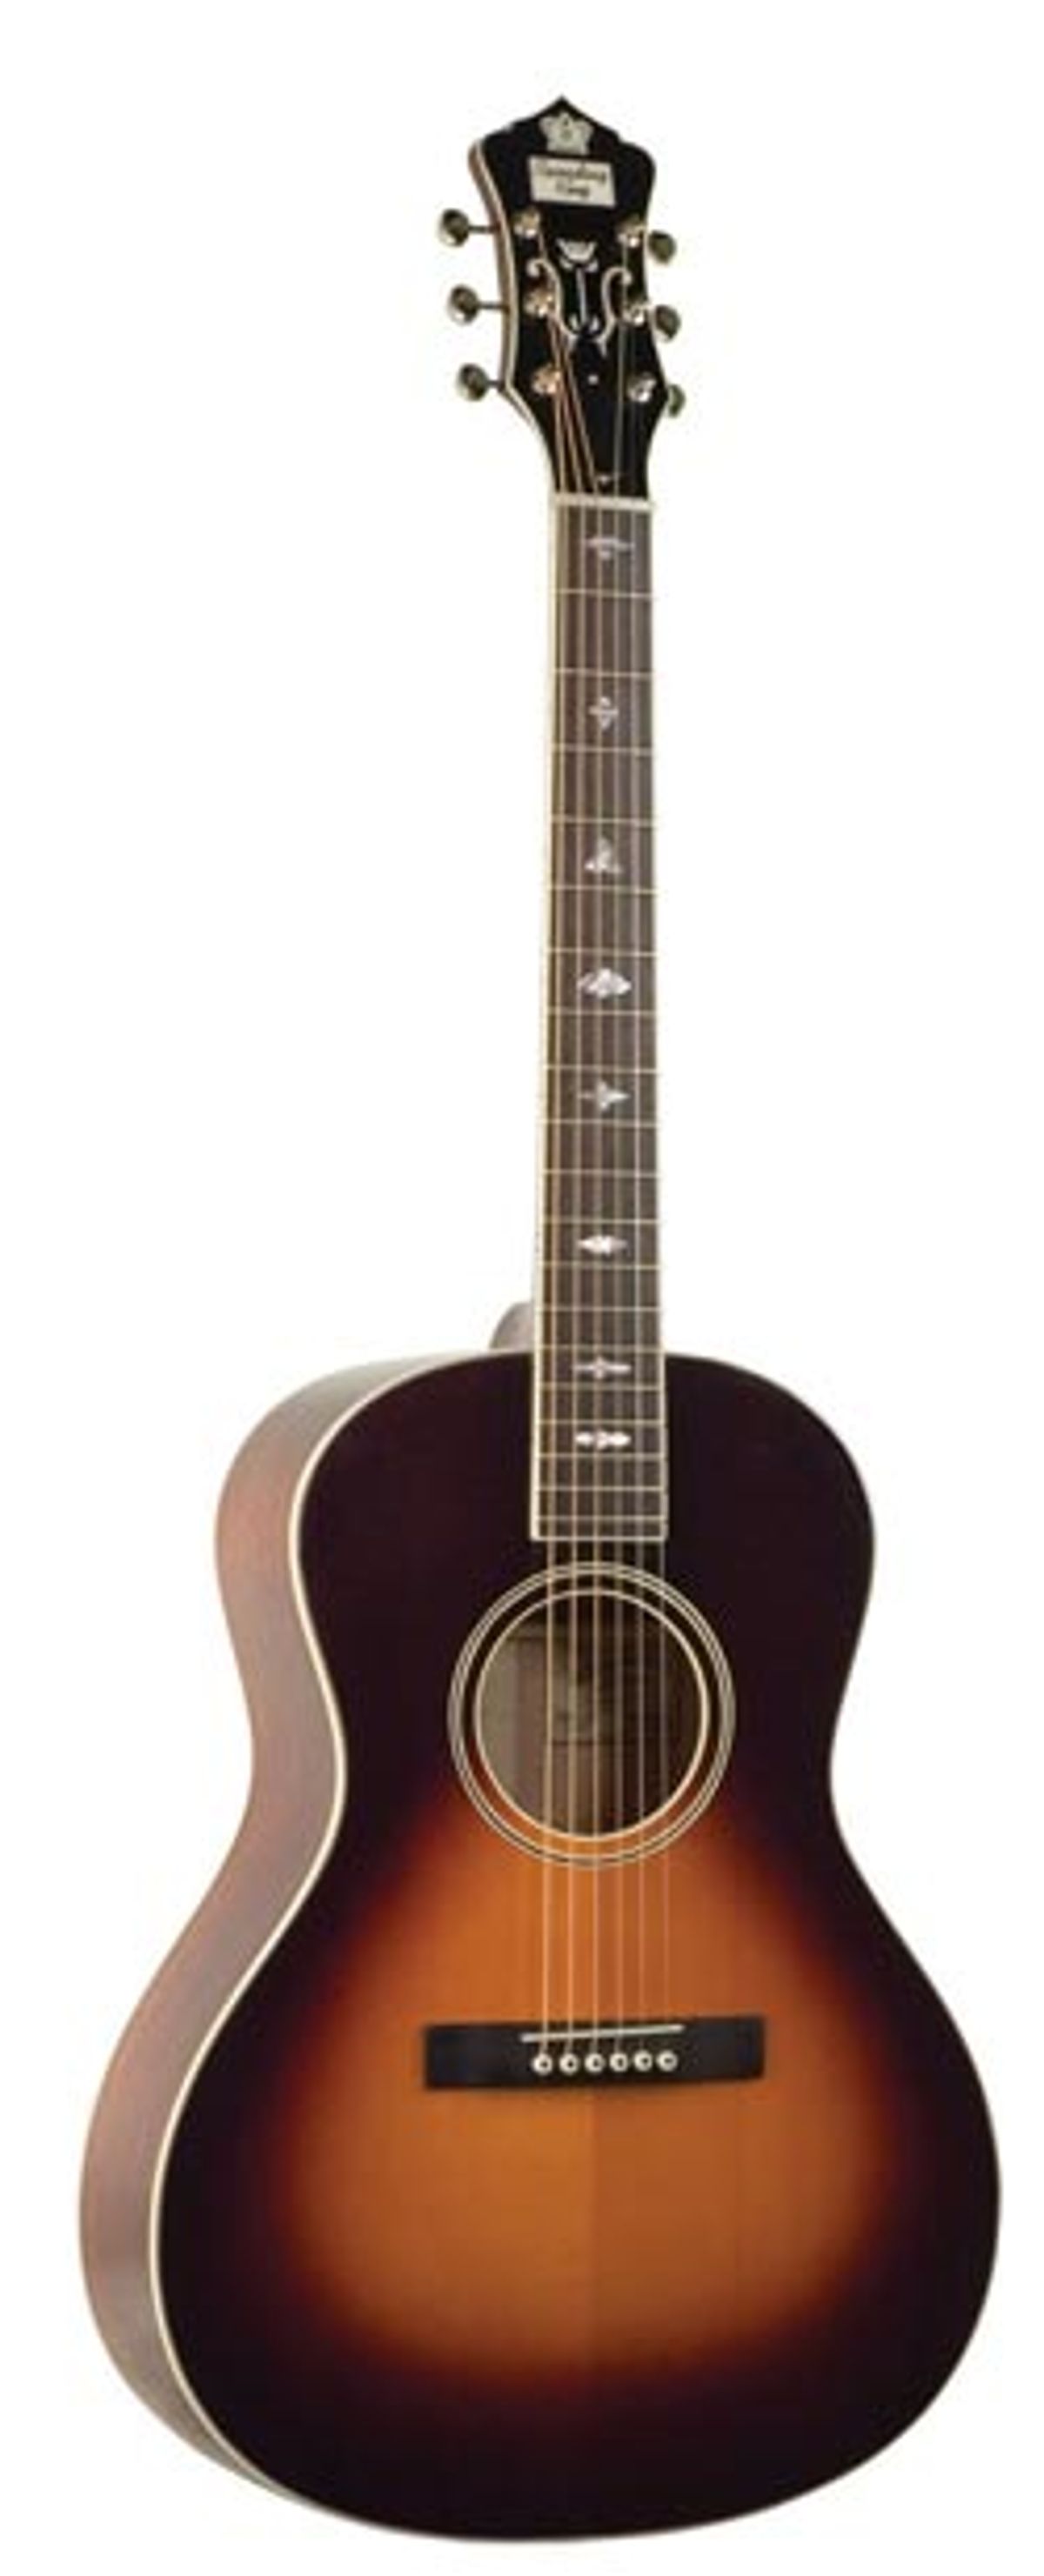 Recording King Introduces Classic Small-Body Acoustic 